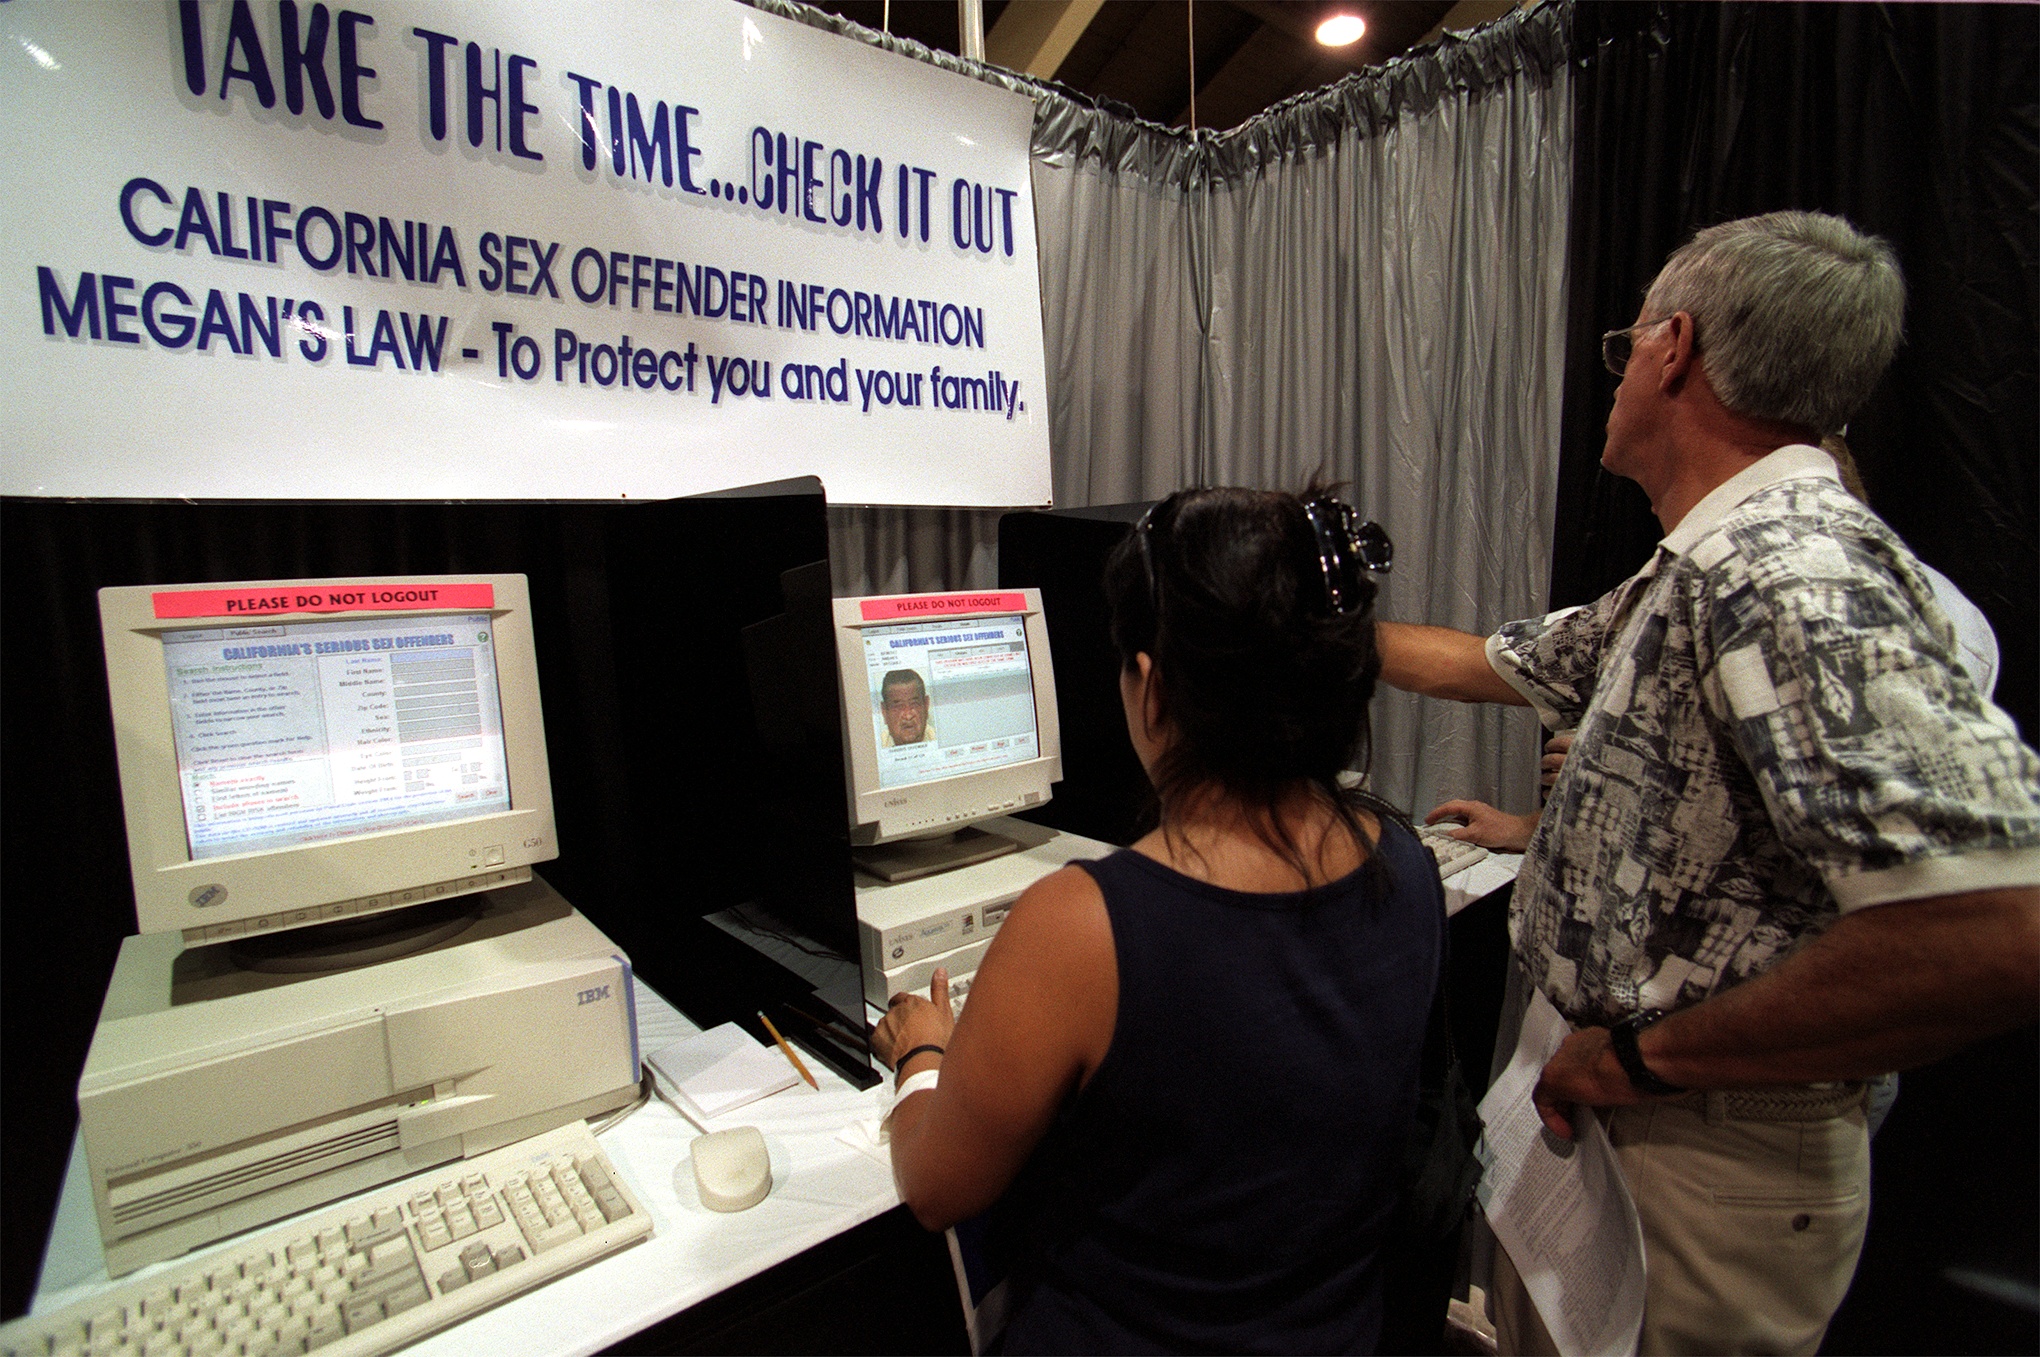 The Los Angeles County Fair starts today in Pomona. Pic shows a booth set for fairgoers to check on